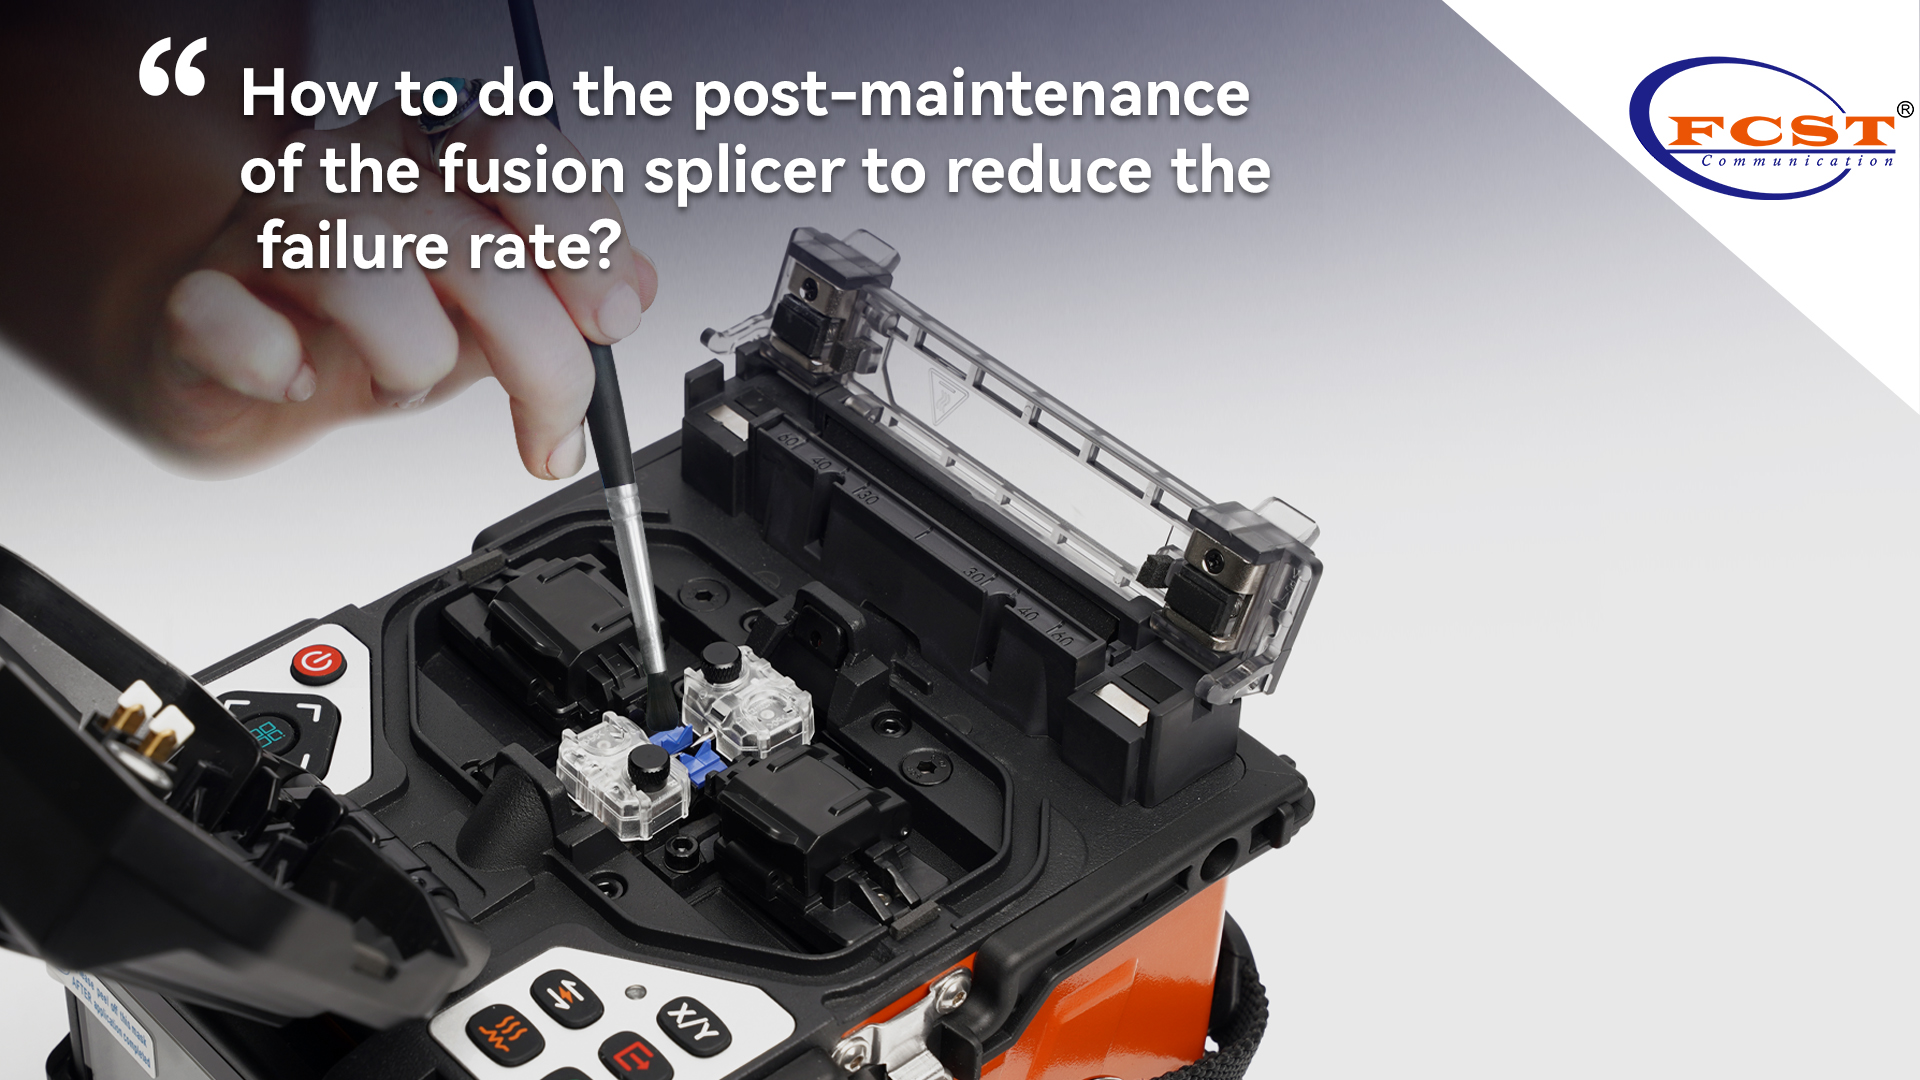 How to do the post-maintenance of the fusion splicer to reduce the failure rate?